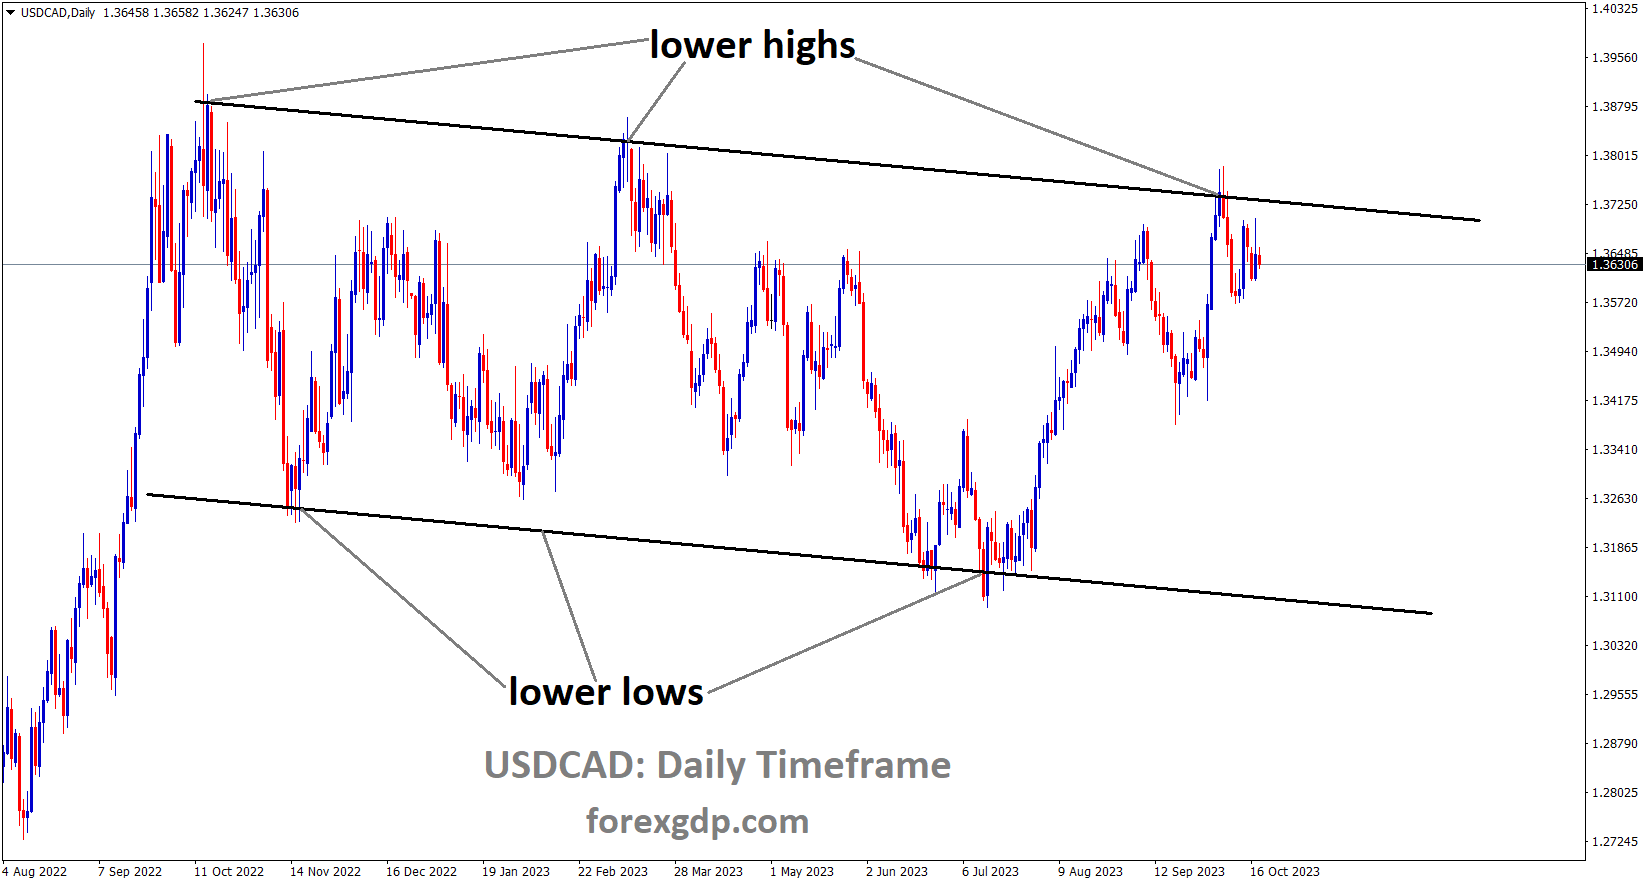 USDCAD is moving in the Descending channel and the market has fallen from the lower high area of the channel